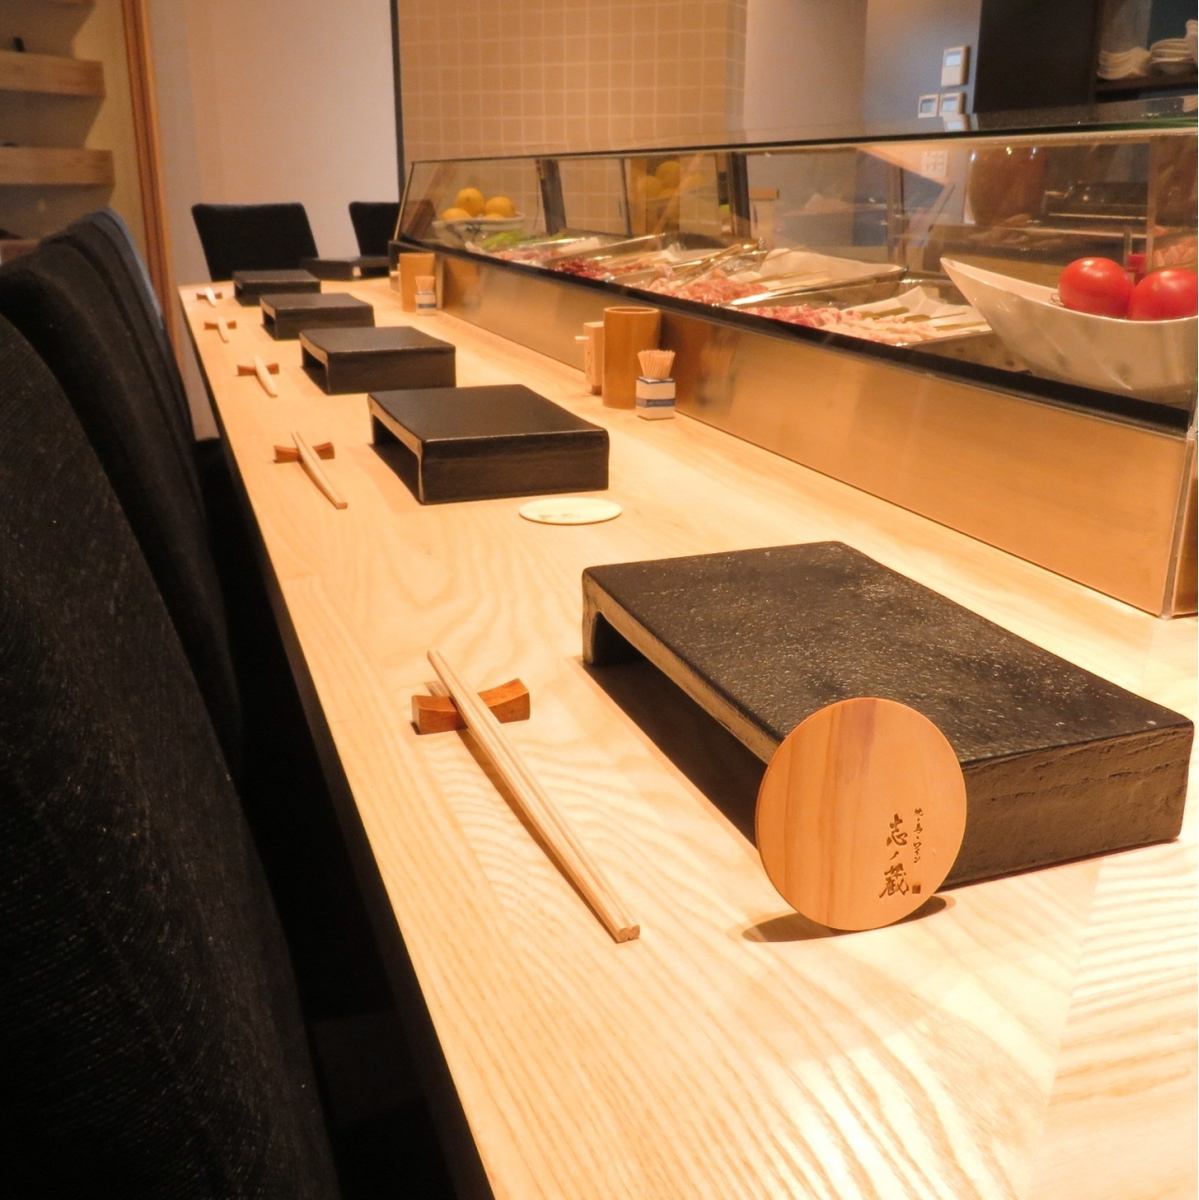 Fashionable and luxurious counter seats are also available ◎ Recommended for dates ♪